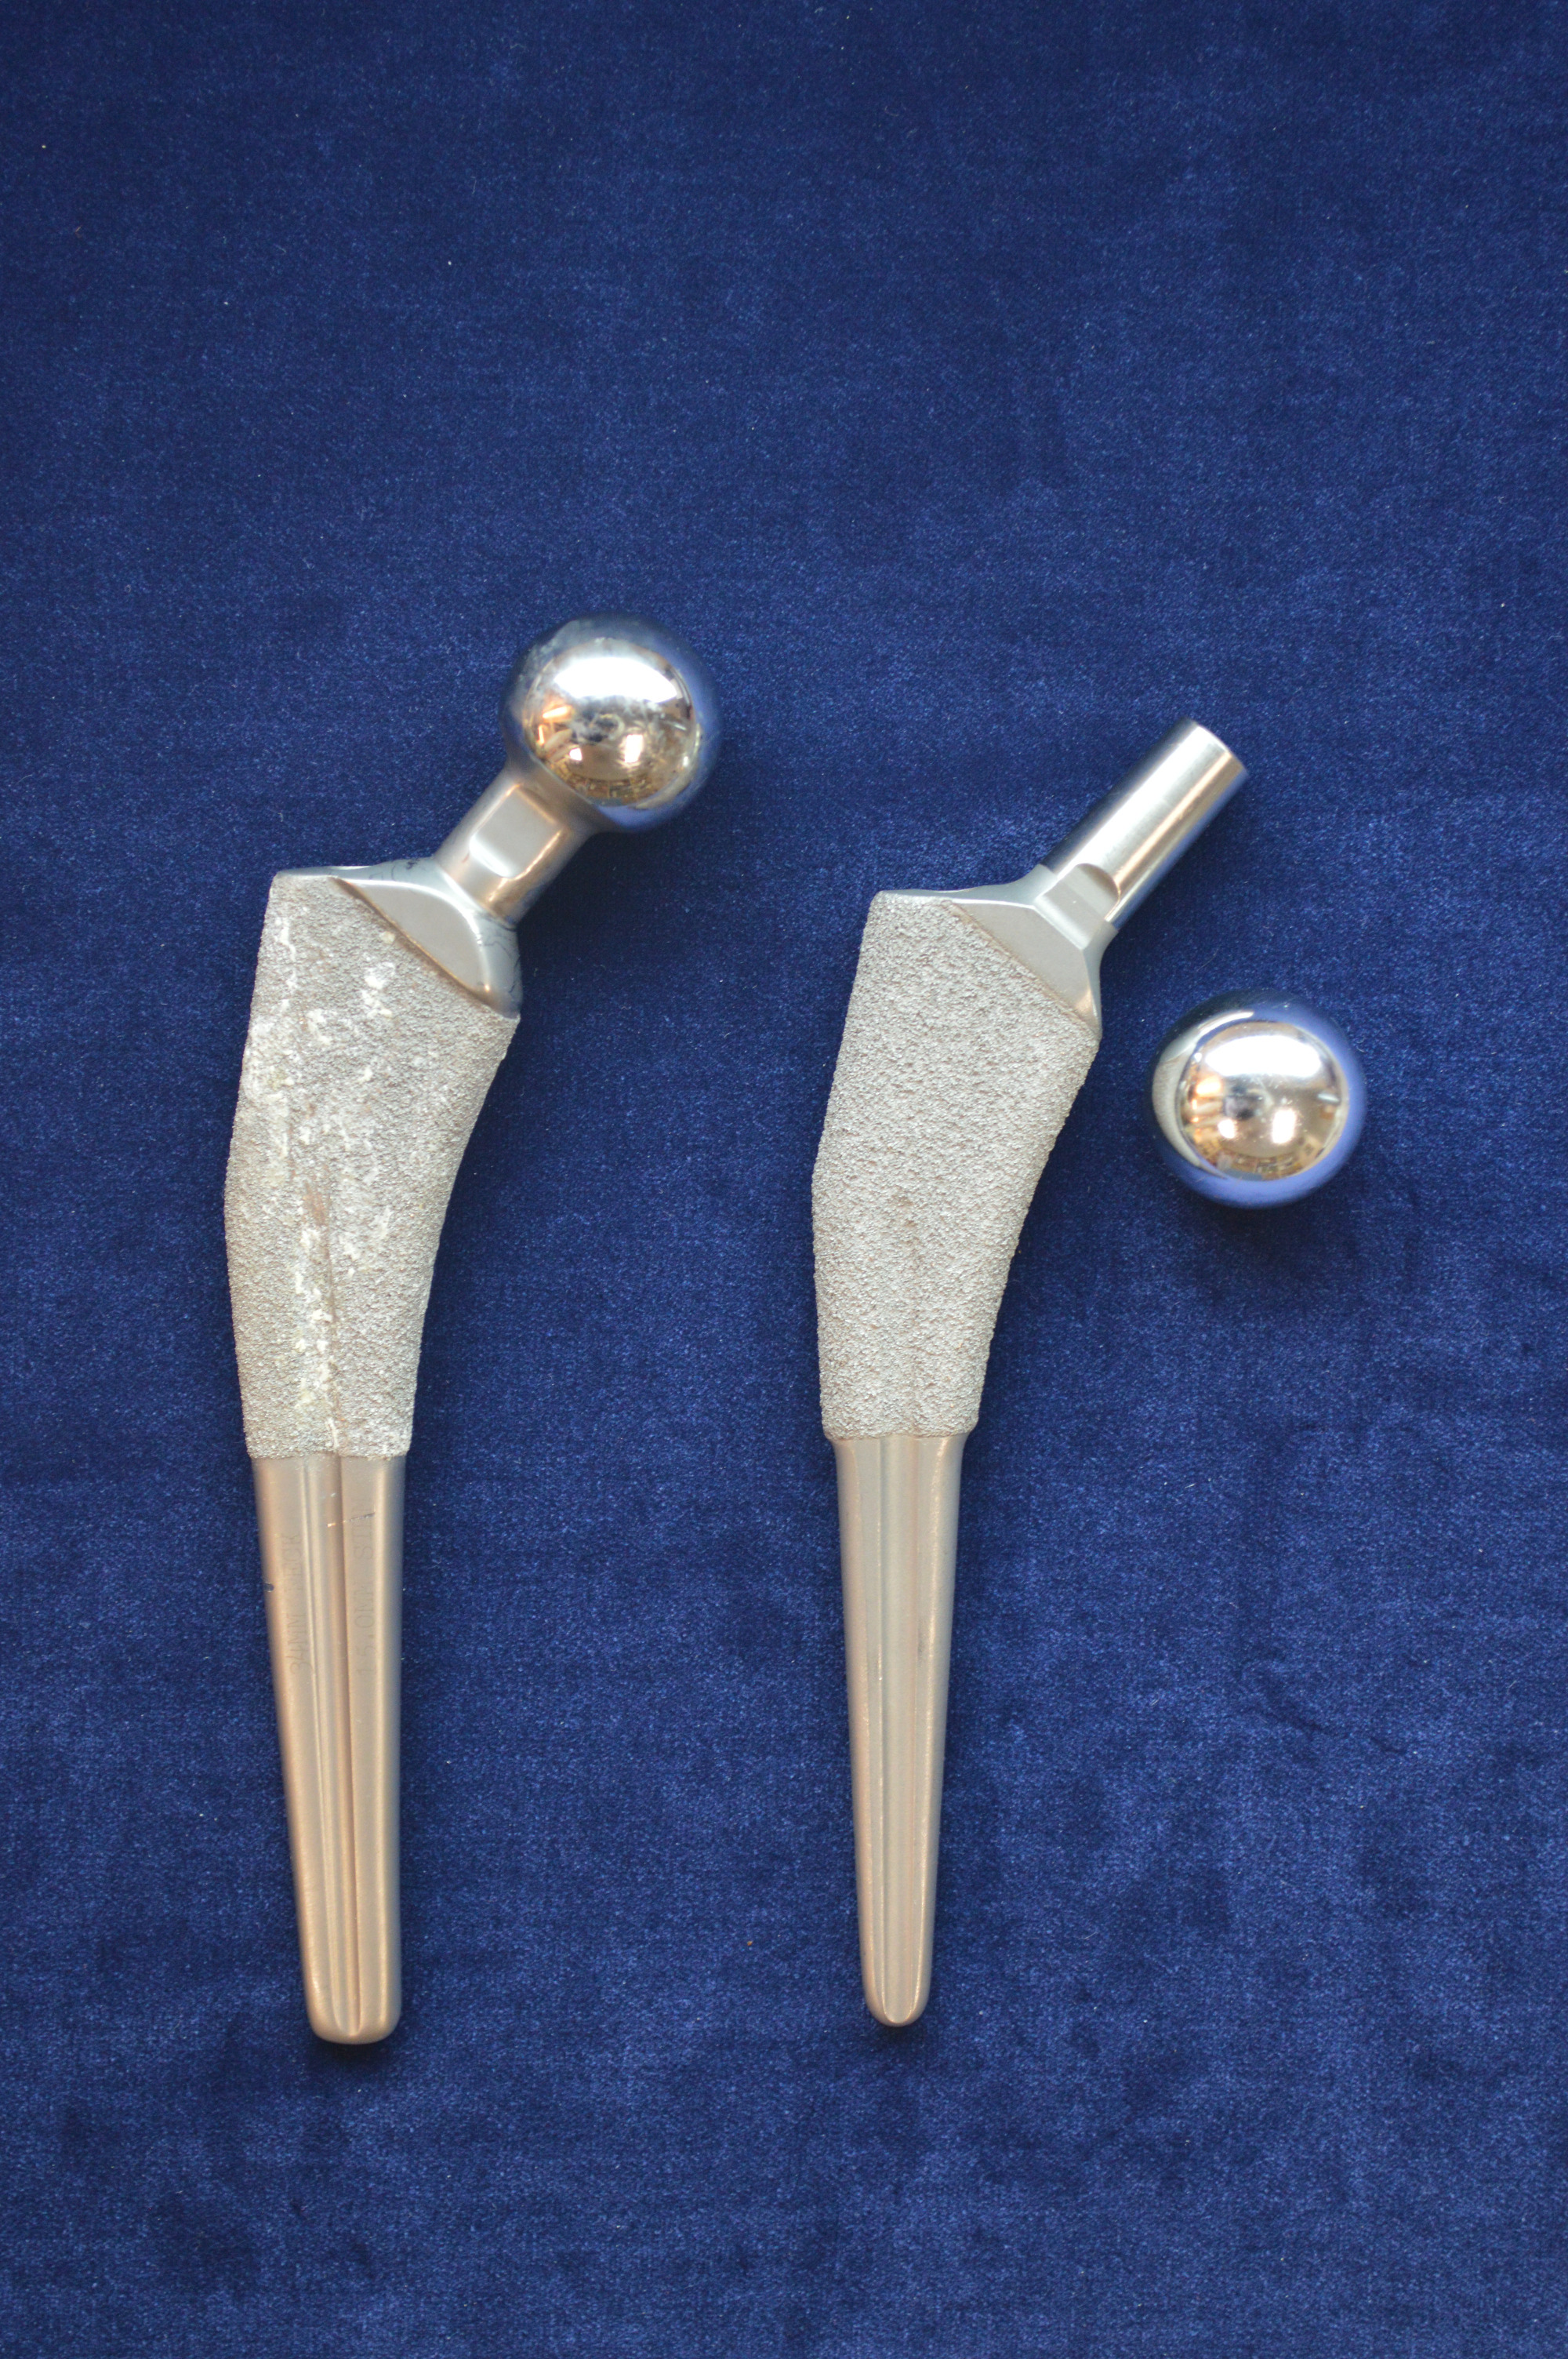 Fig. 1 
          Photograph of the first- (left) and second- (right) generation Taperloc femoral components. The second-generation is modular and has a reduced profile distal to the porous coating.
        